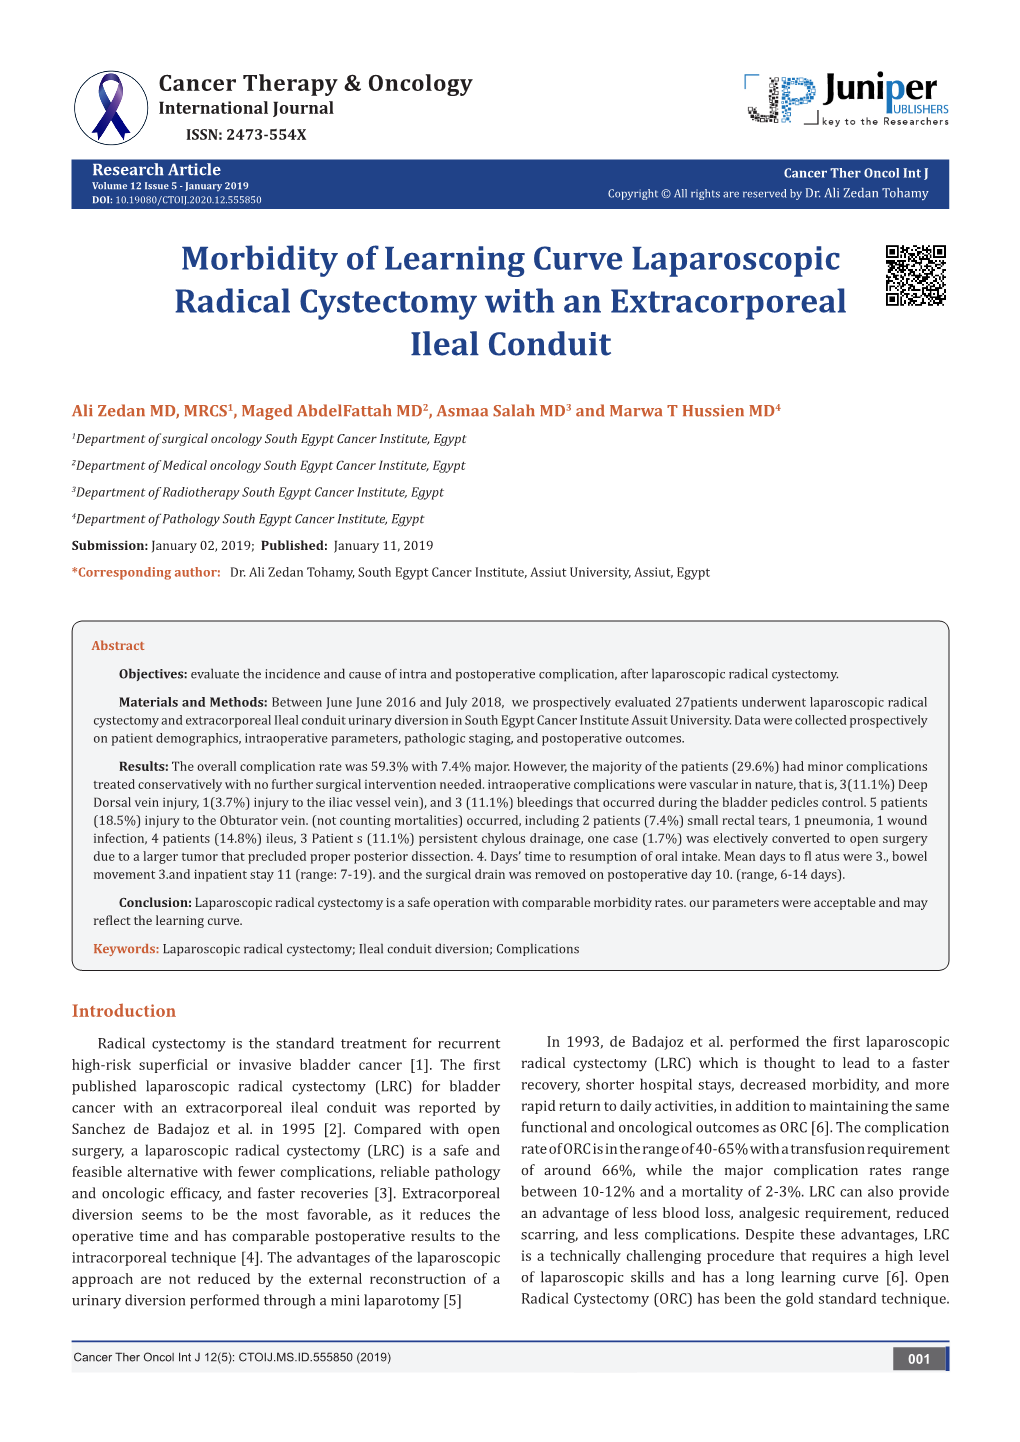 Morbidity of Learning Curve Laparoscopic Radical Cystectomy with an Extracorporeal Ileal Conduit